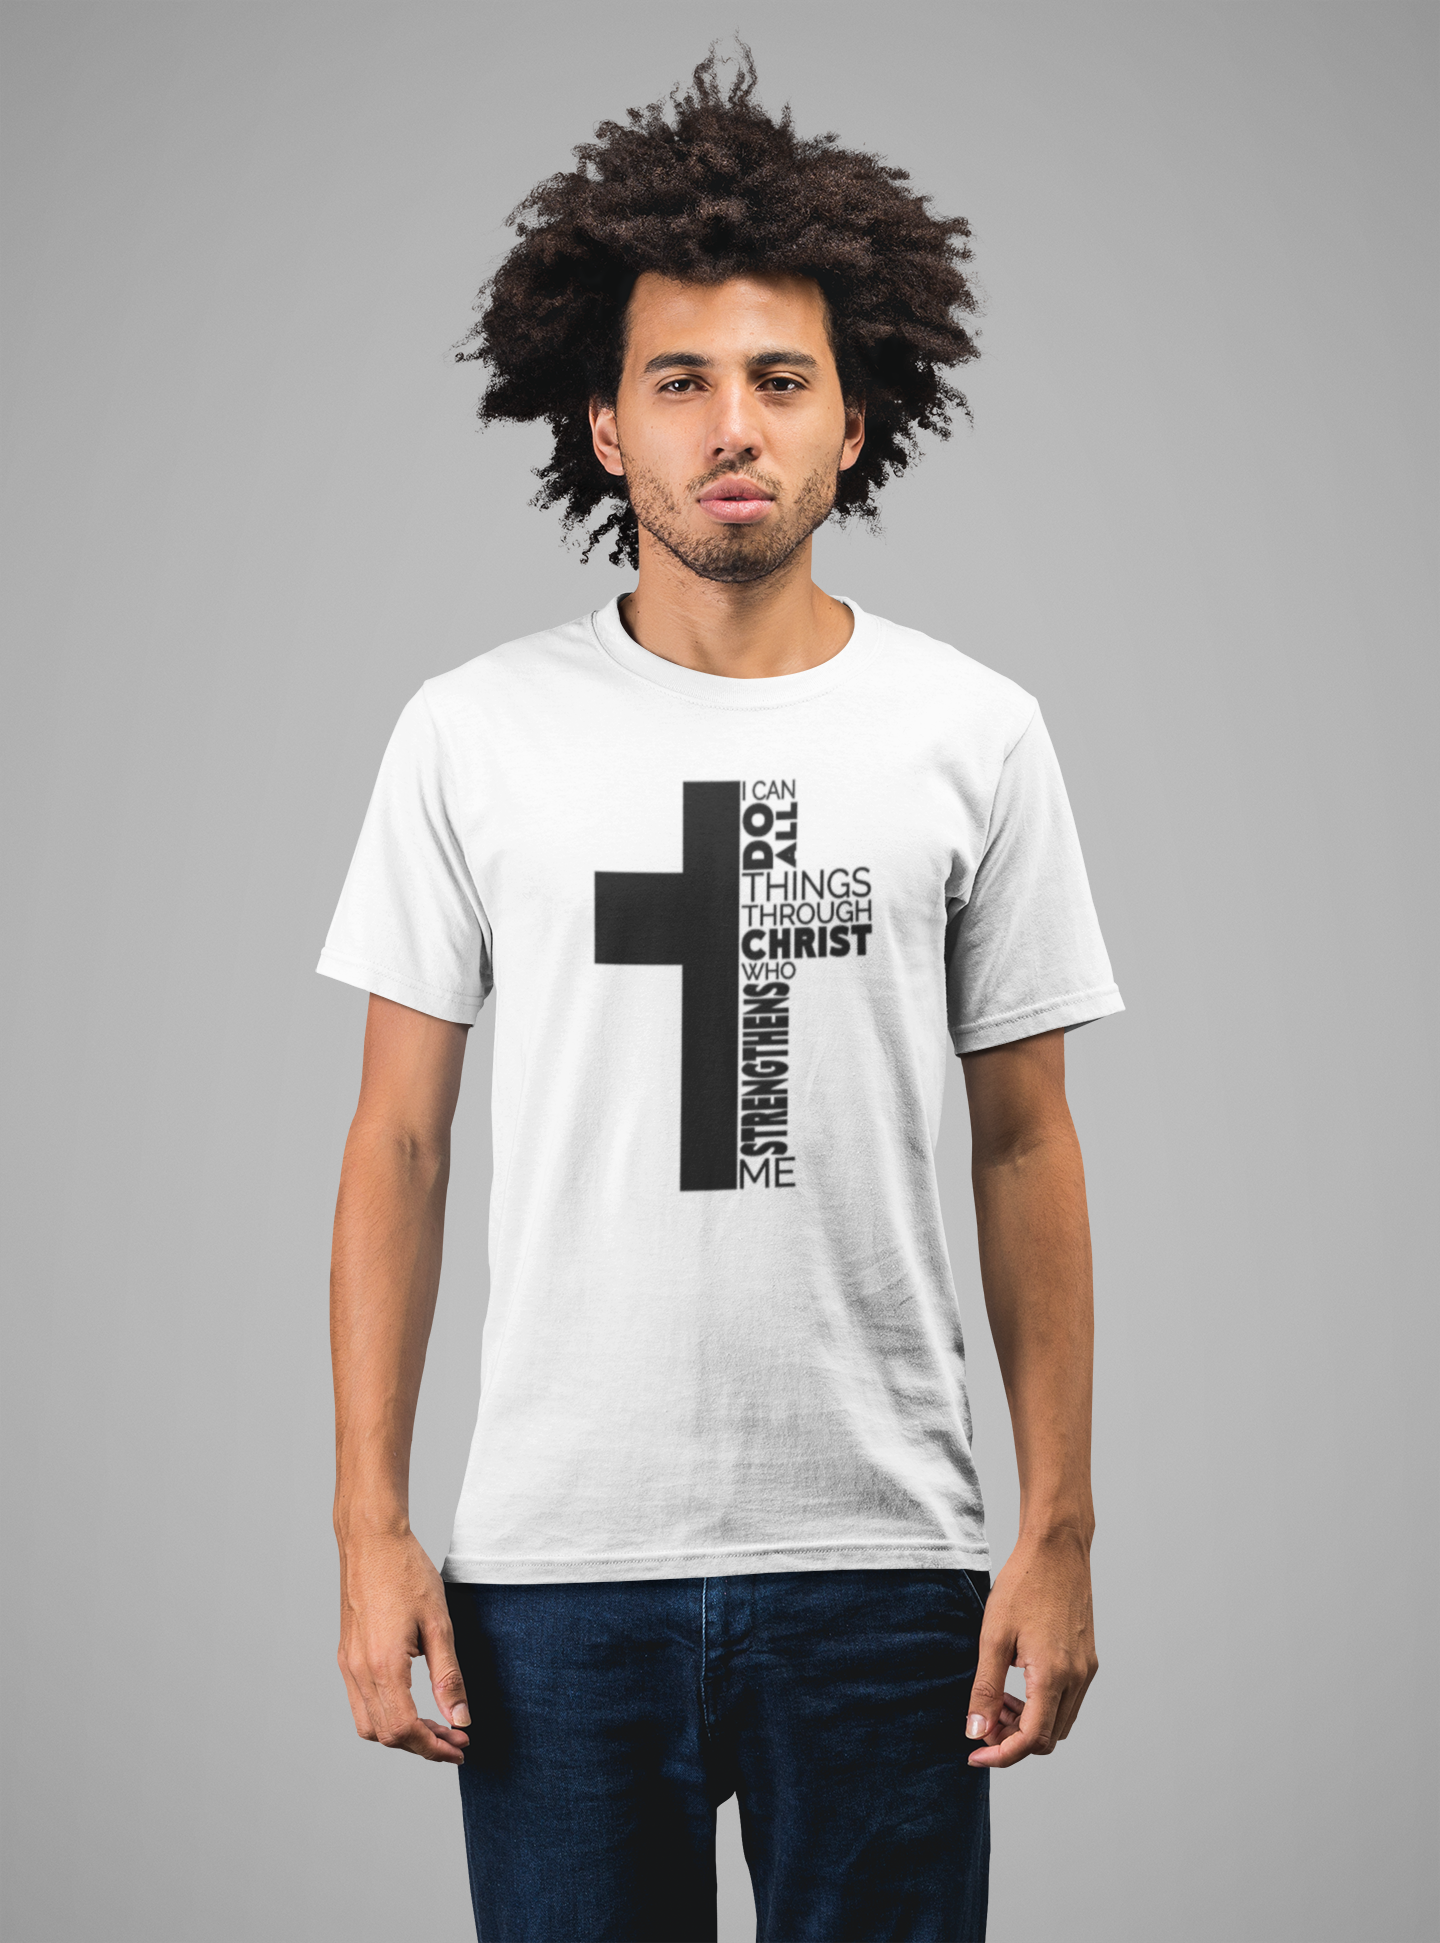 I can do all things-cross T-shirt